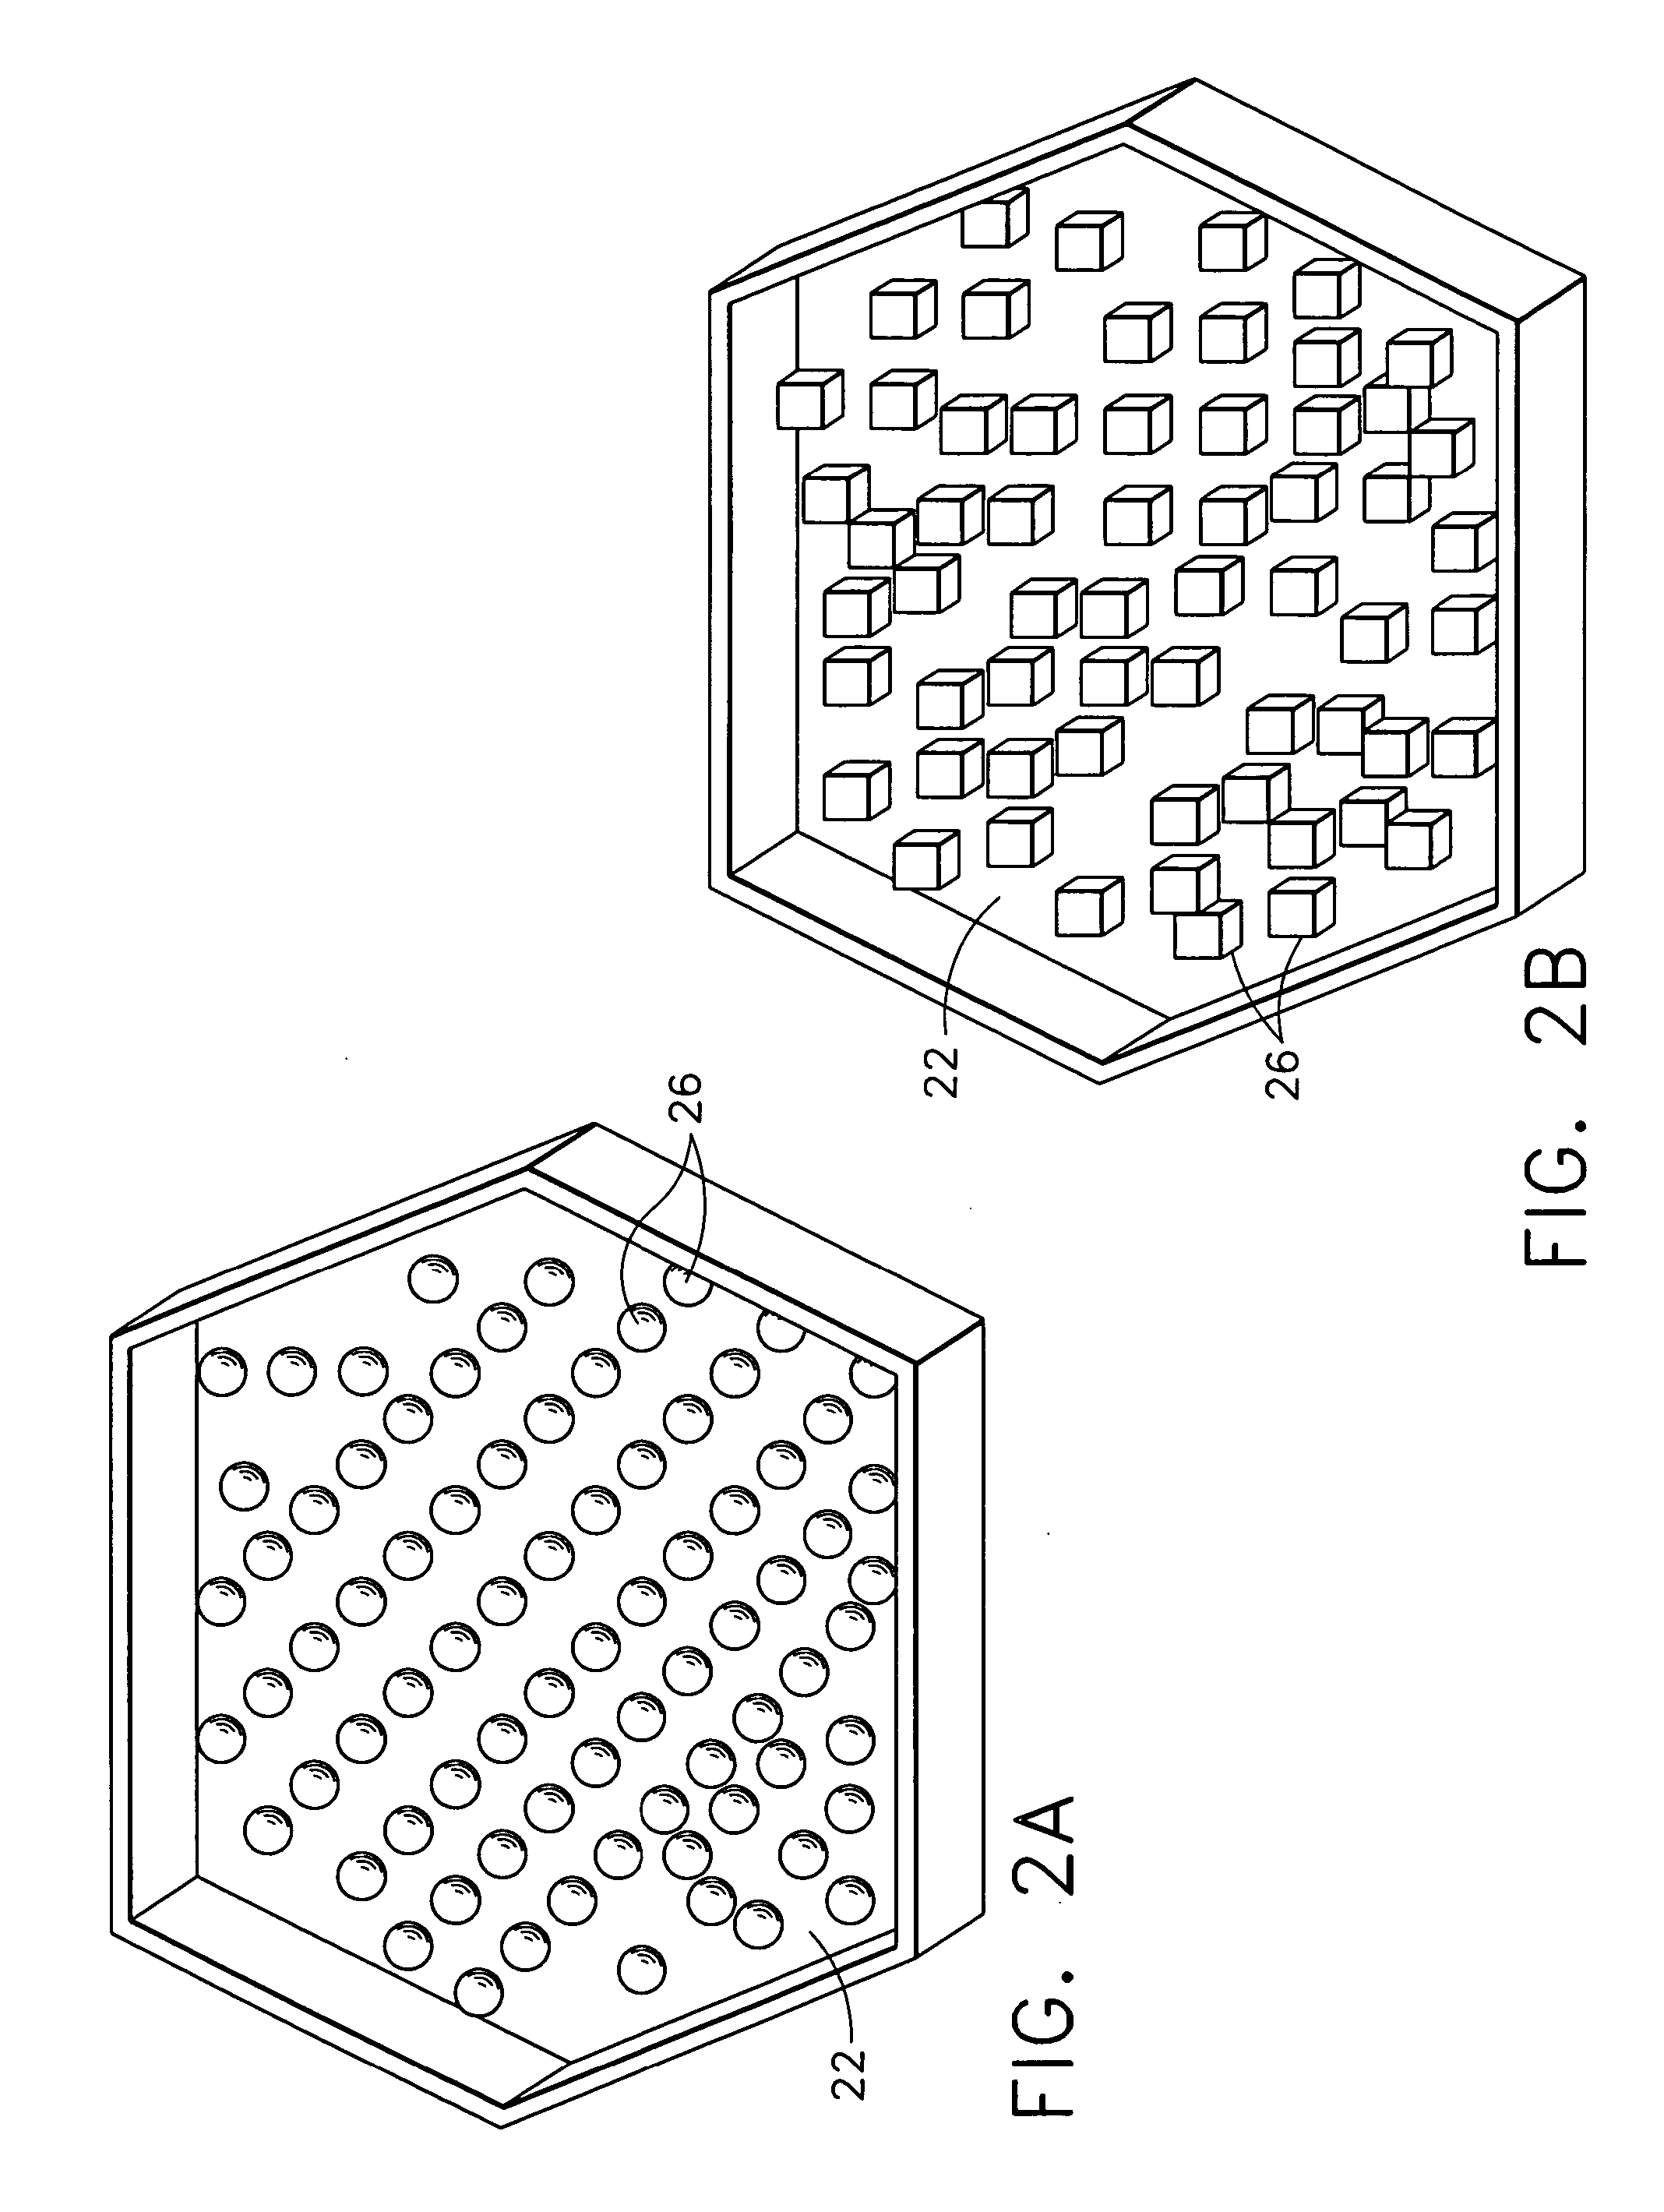 Apparatus and method for aircraft cabin noise attenuation via non-obstructive particle damping